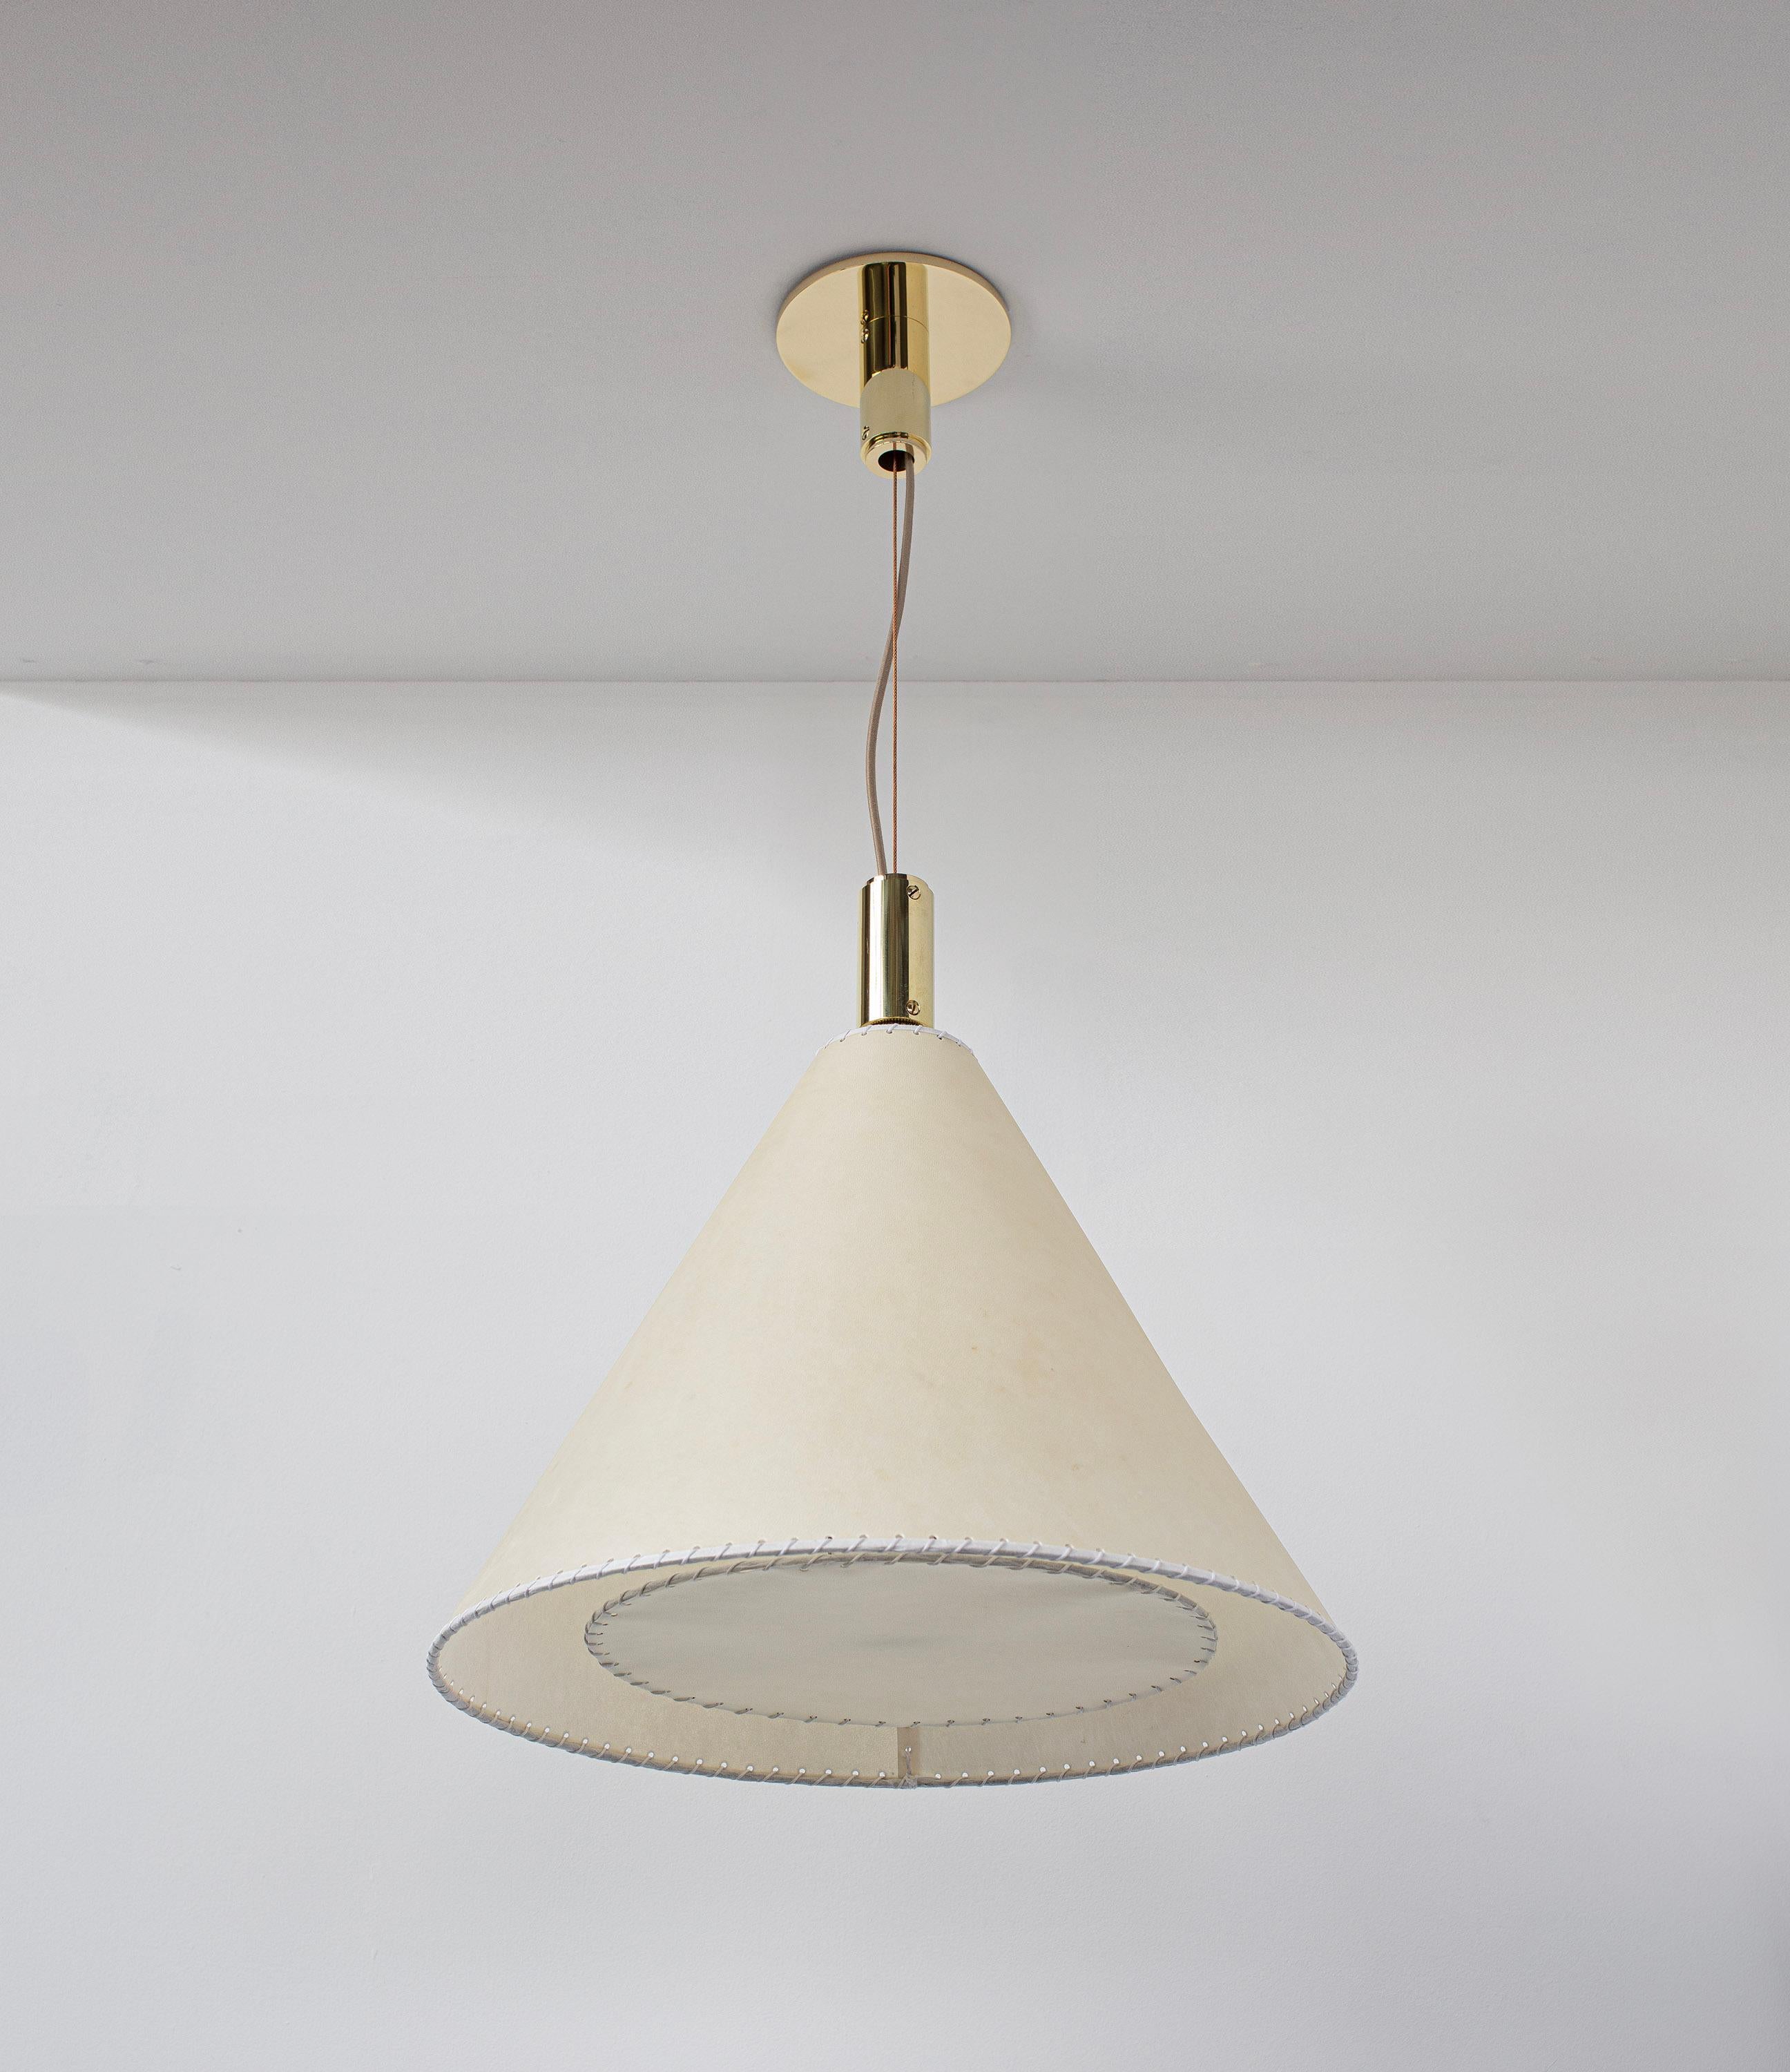 Series 02 Pendant, Polished Unlacquered Brass, Large Goatskin Parchment Shade In New Condition For Sale In Ozone Park, NY